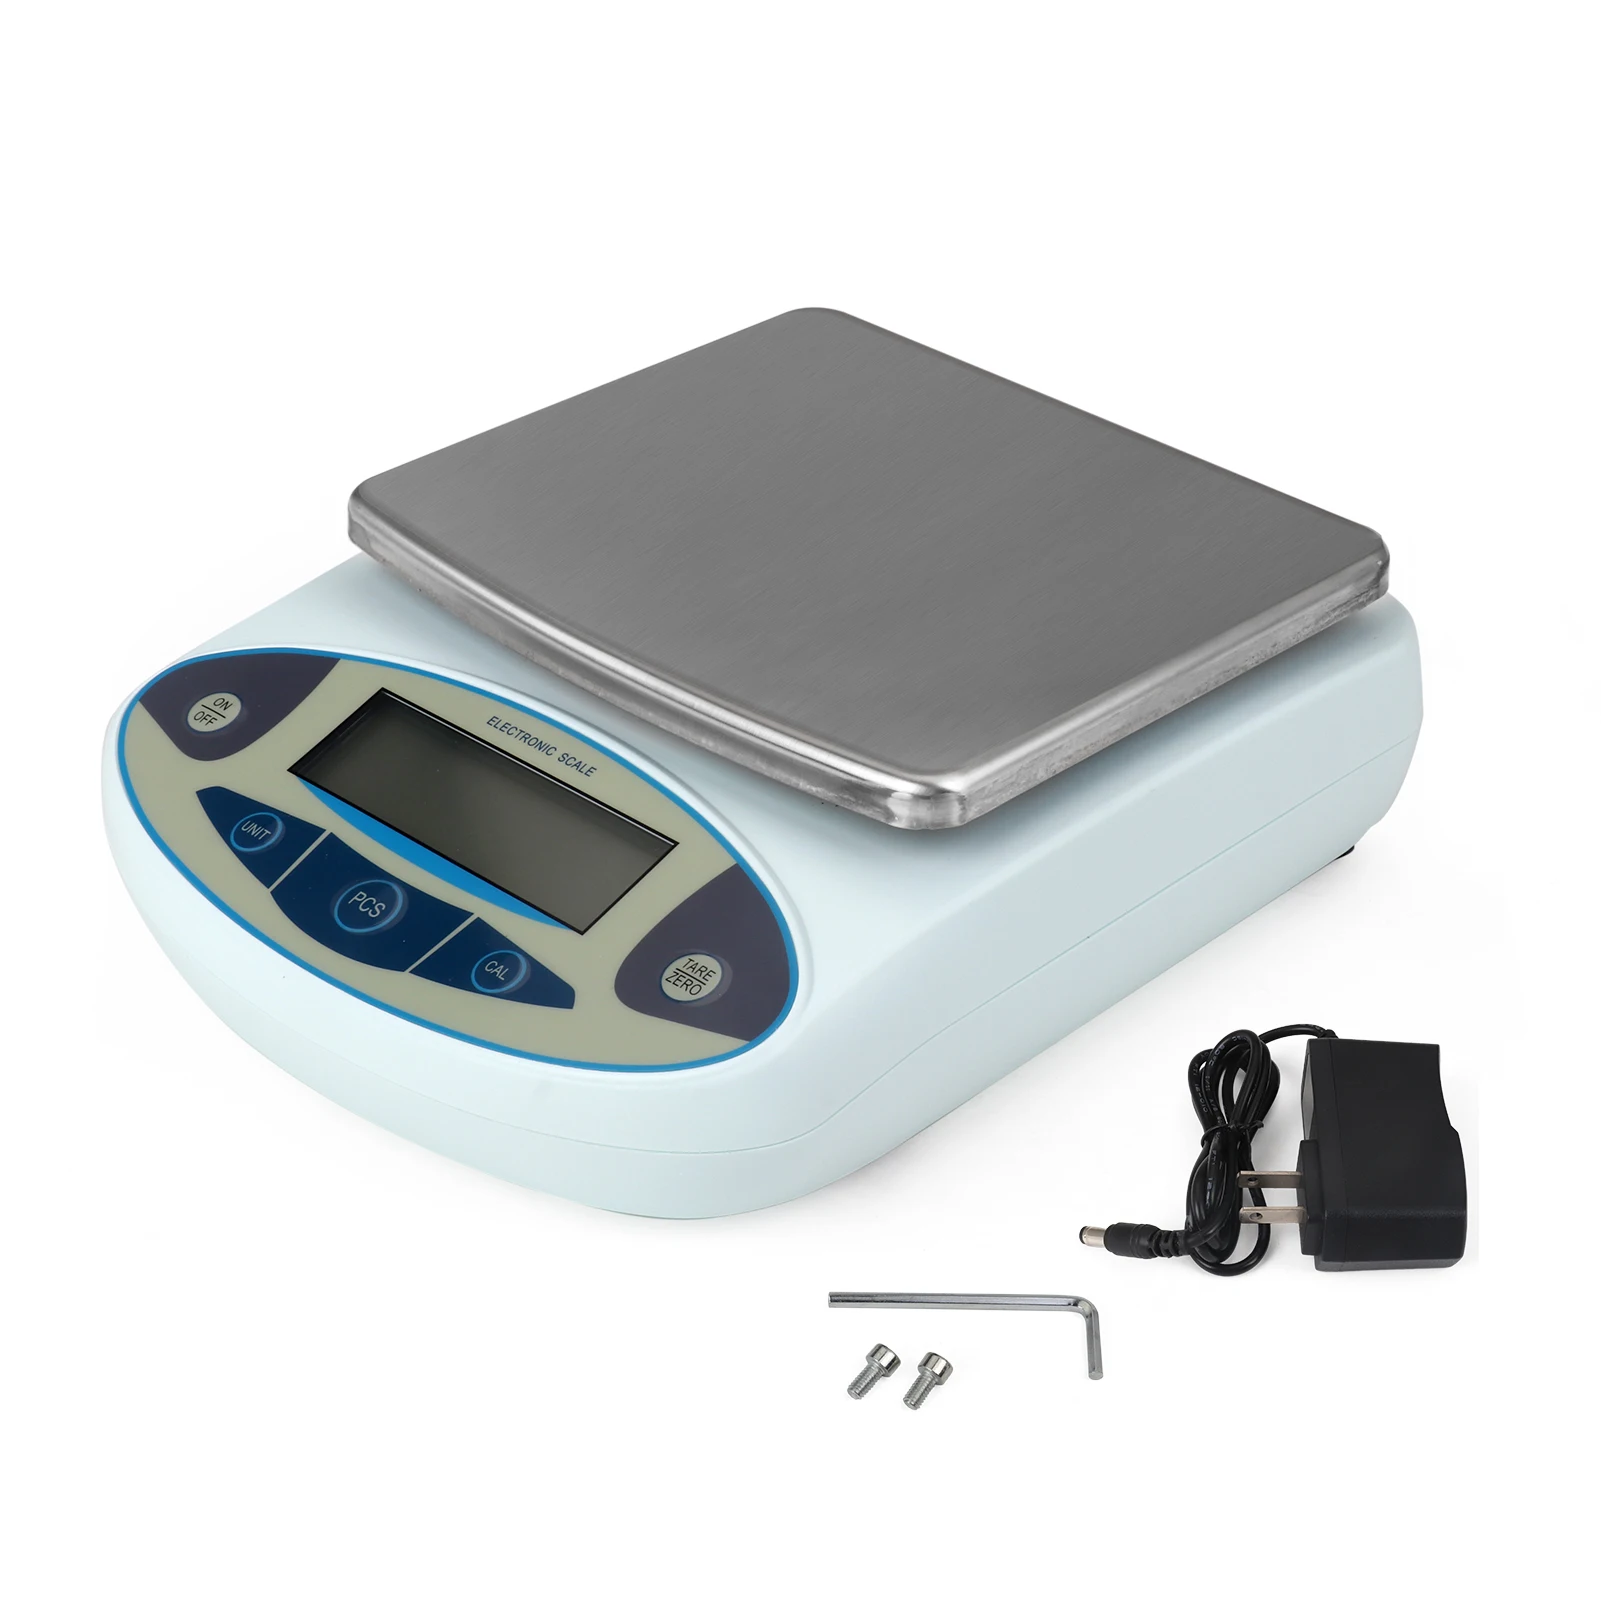 

Kitchen Scale 5000g x 0.01g Lab Analytical Balance W/ LCD Backlit Screen Digital Weight Mini Precision Pocket Electronic